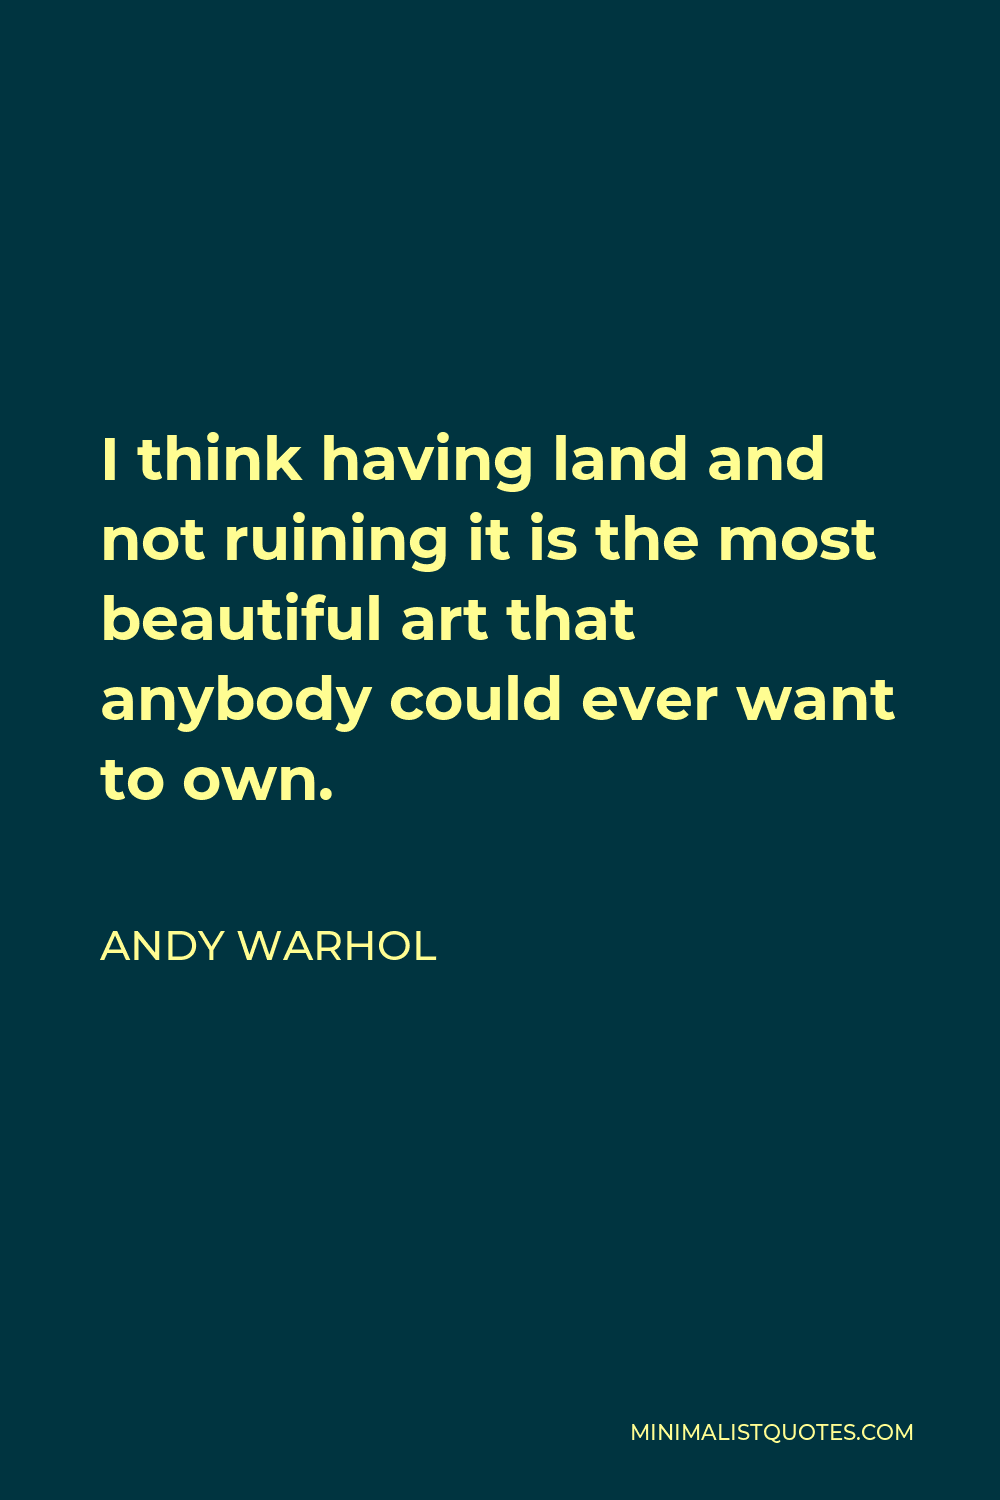 Andy Warhol Quote - I think having land and not ruining it is the most beautiful art that anybody could ever want to own.